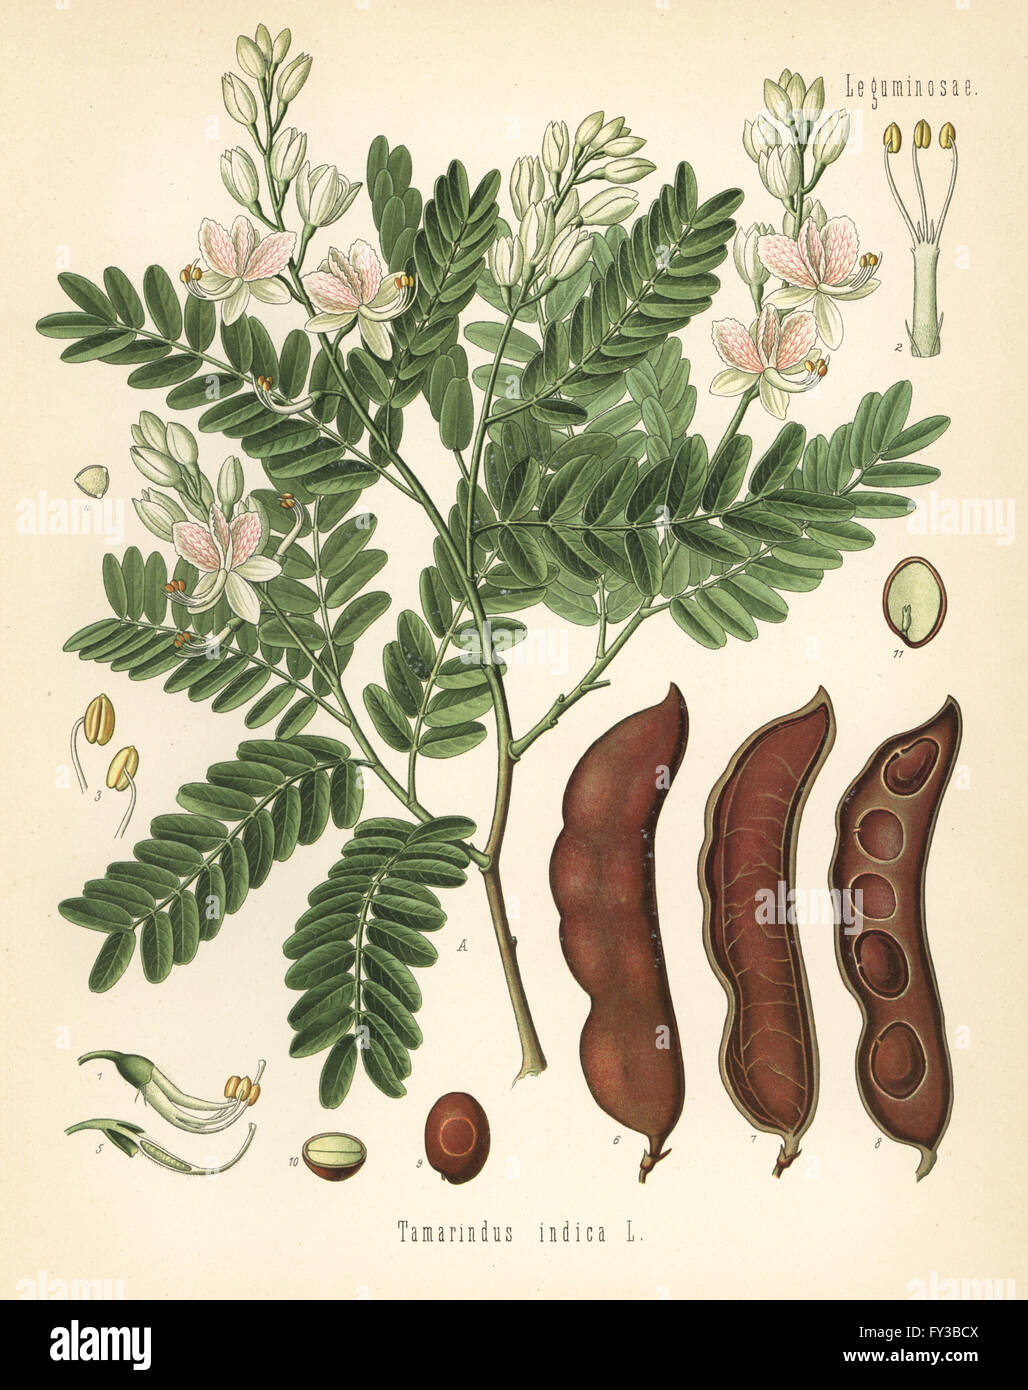 Tamarind, Tamarindus indica. Chromolithograph after a botanical illustration from Hermann Adolph Koehler's Medicinal Plants, edited by Gustav Pabst, Koehler, Germany, 1887. Stock Photo